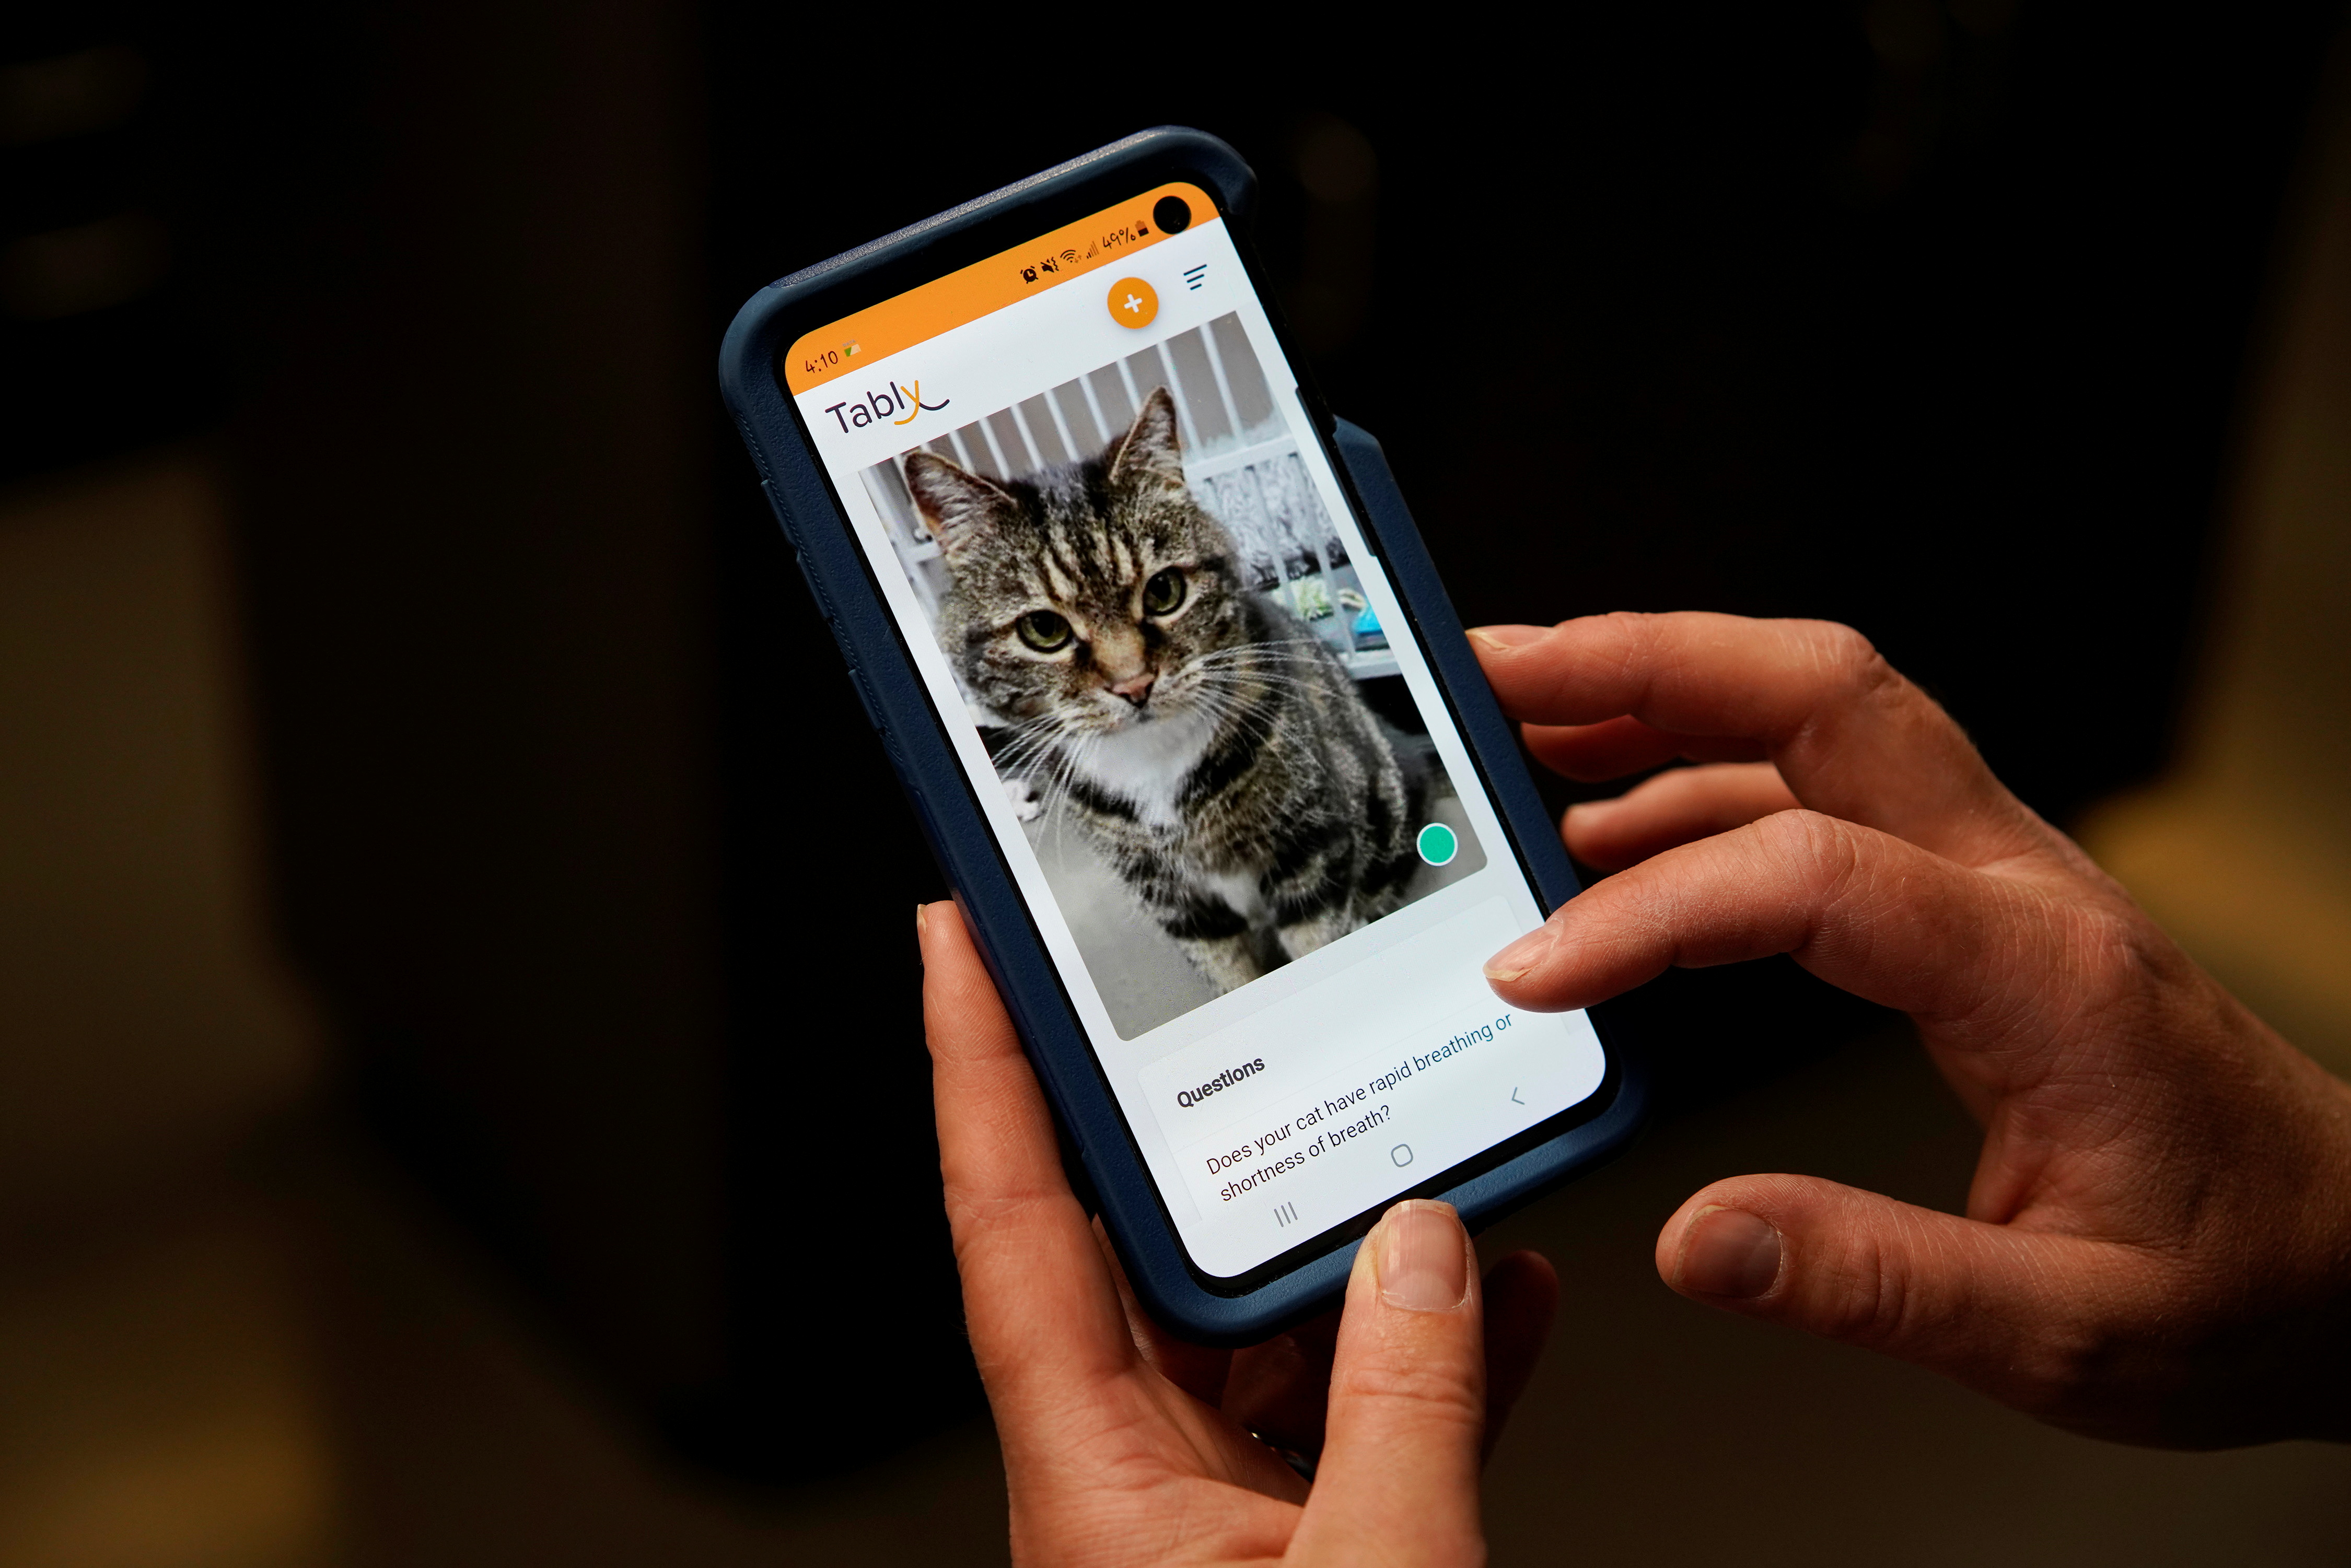 Dr. Liz Ruelle uses a new app called Tably that reads cat's faces and helps her monitor a cat's health at the Wild Rose Cat clinic in Calgary, Alberta, Canada, July 14, 2021. REUTERS/Todd Korol